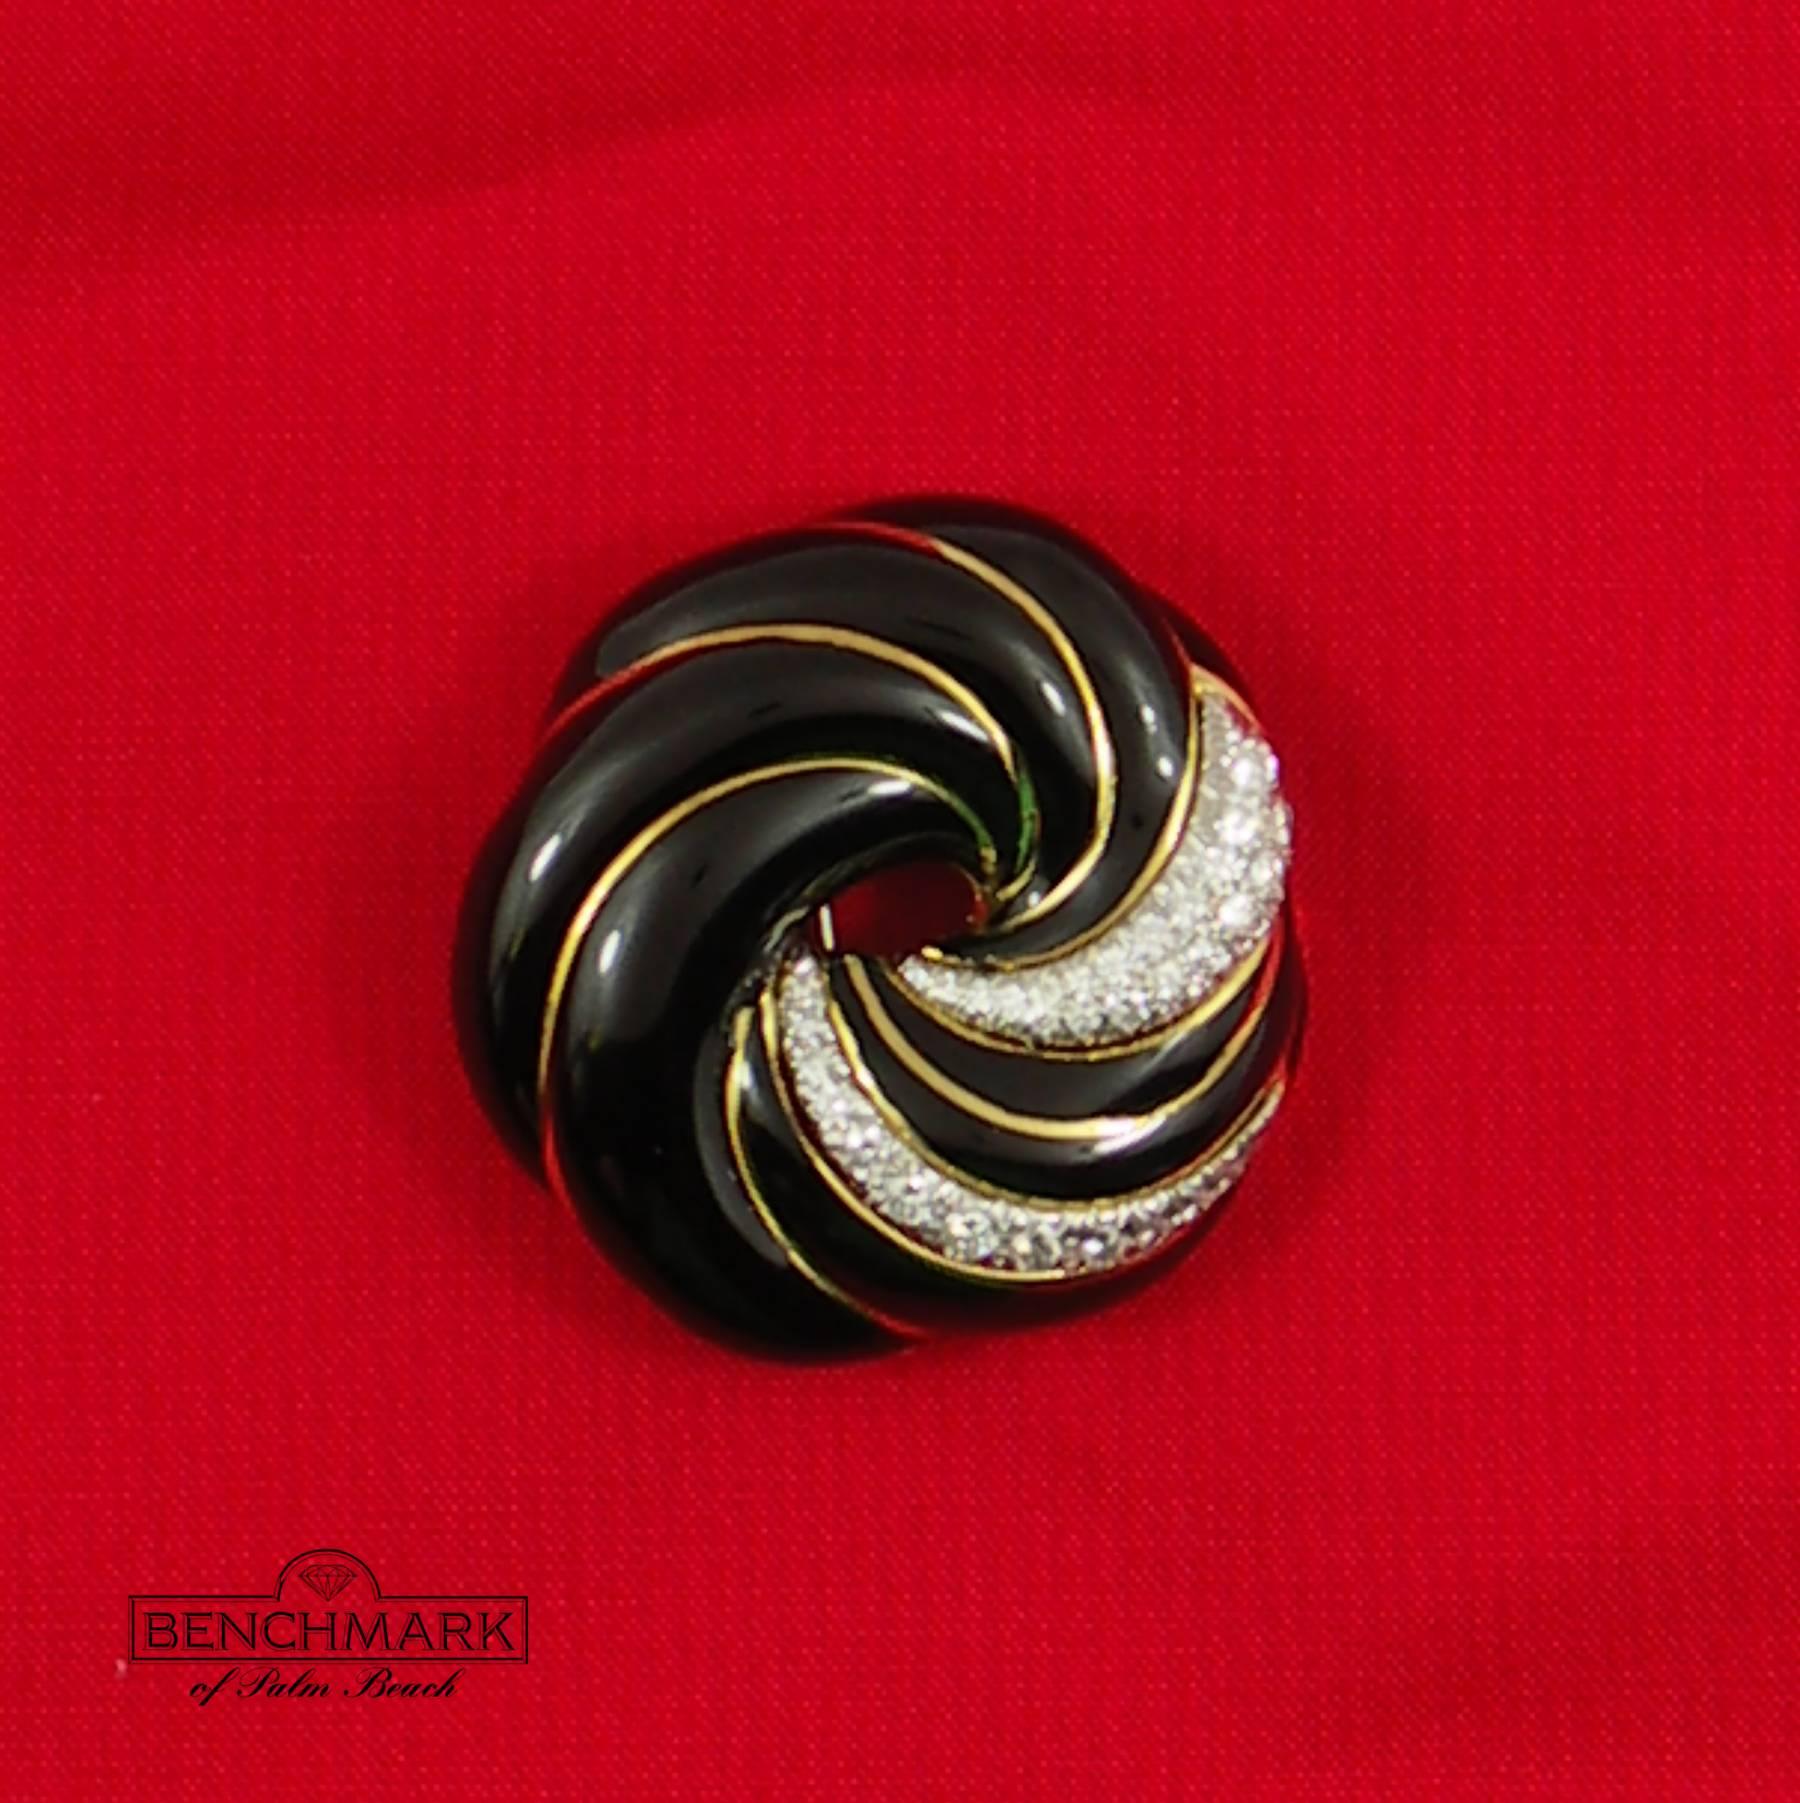 One ladies 18K yellow gold brooch measuring 1 3/4 inches in diameter, of a spiral design with black enamel, and set with 27 round brilliant cut diamonds weighing 1.85ct total approximate weight of overall F/G color and VVS2/VS1 clarity, set in